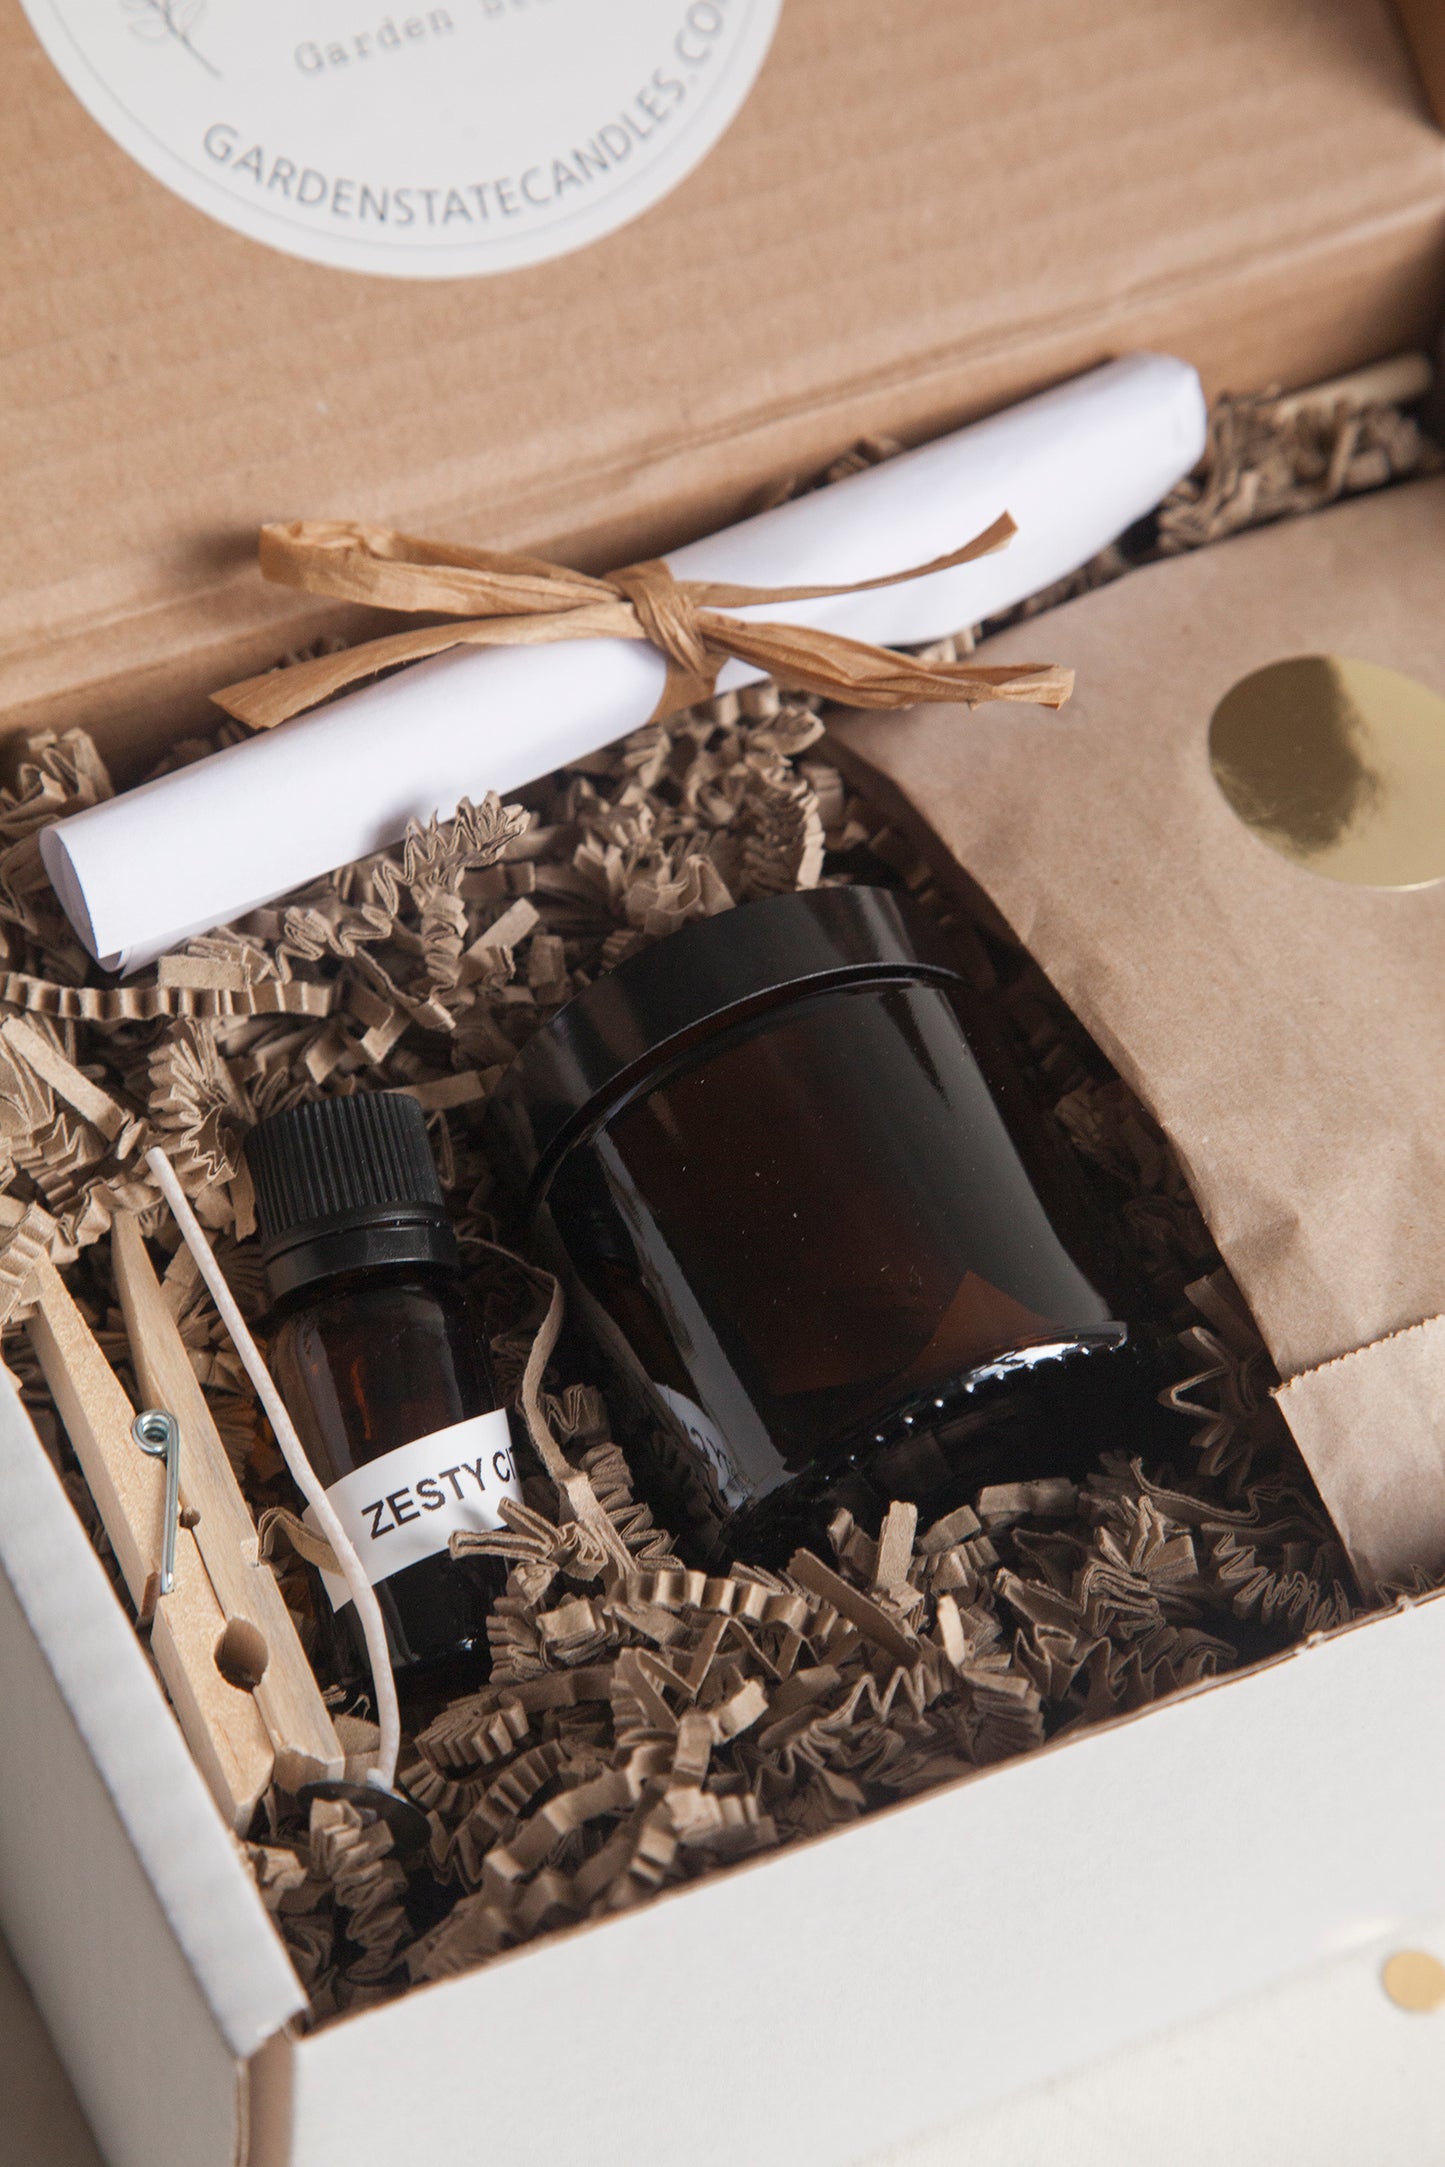 Make a Scented Candle Kit